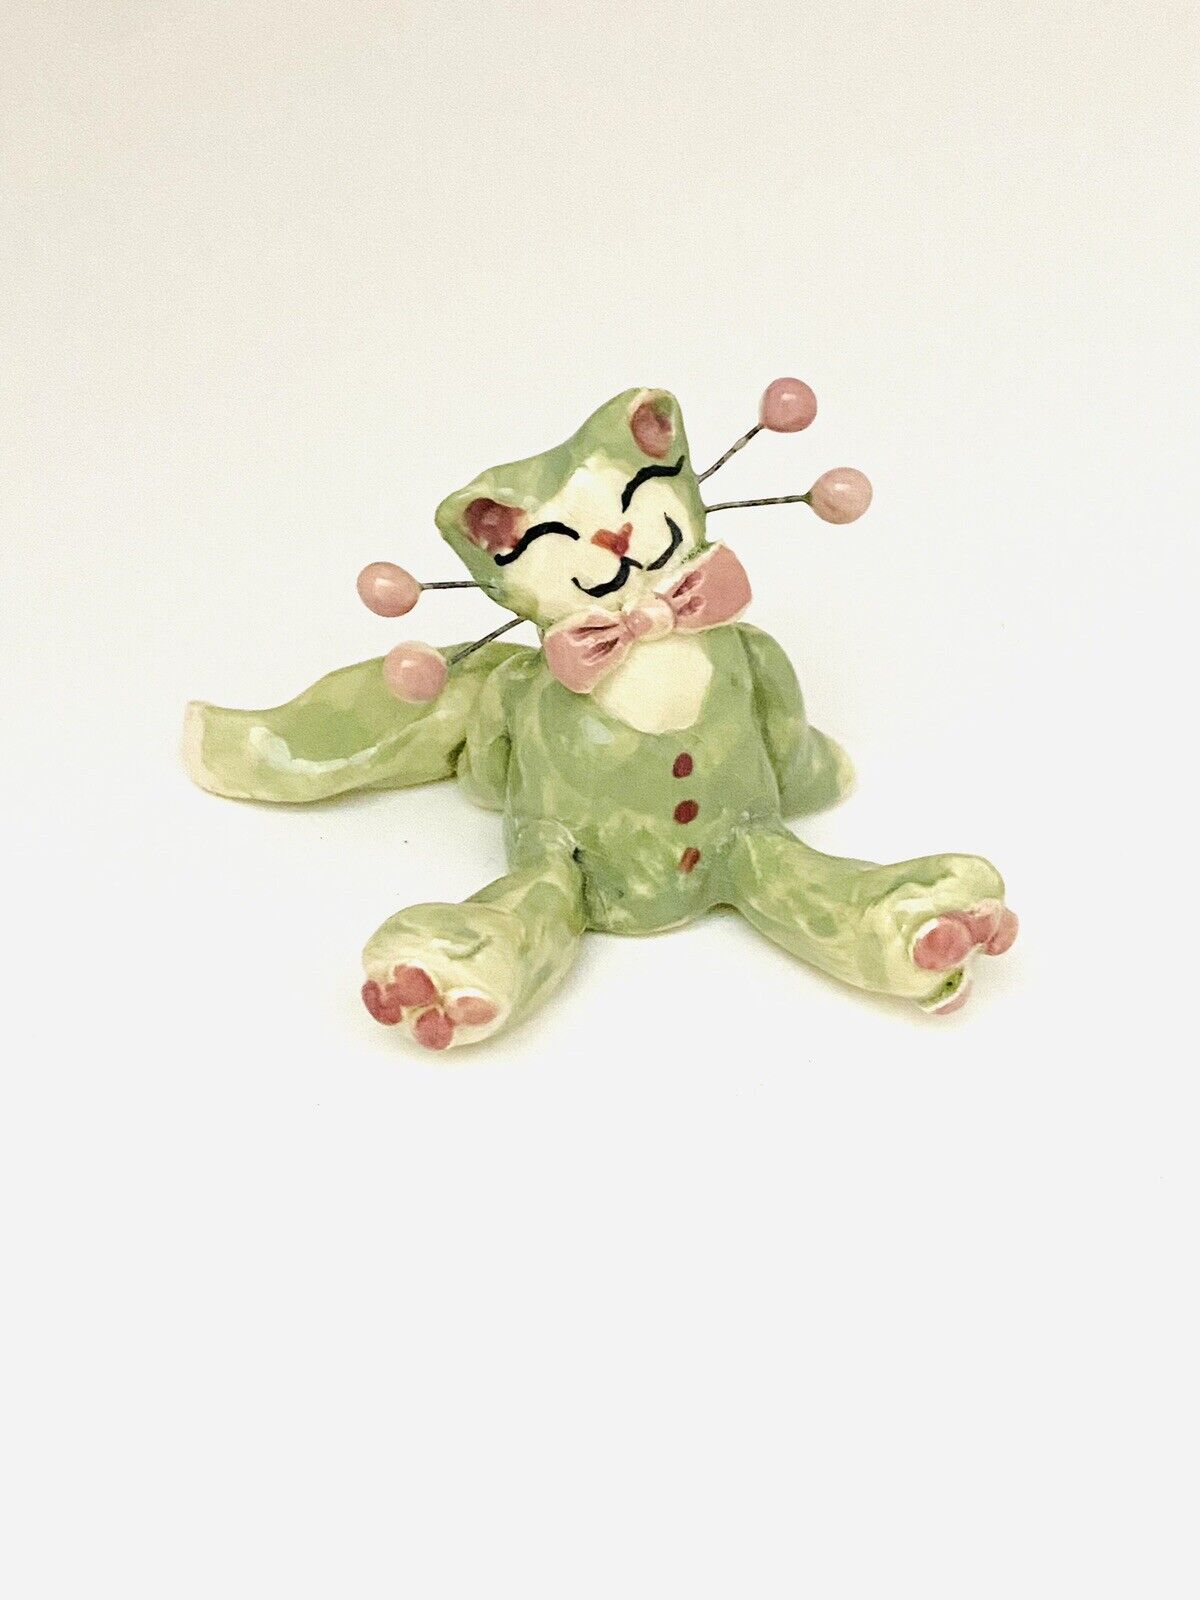 Rare Amy Lacombe Miniature Green With Roses Sitting Kitty Cat Estate